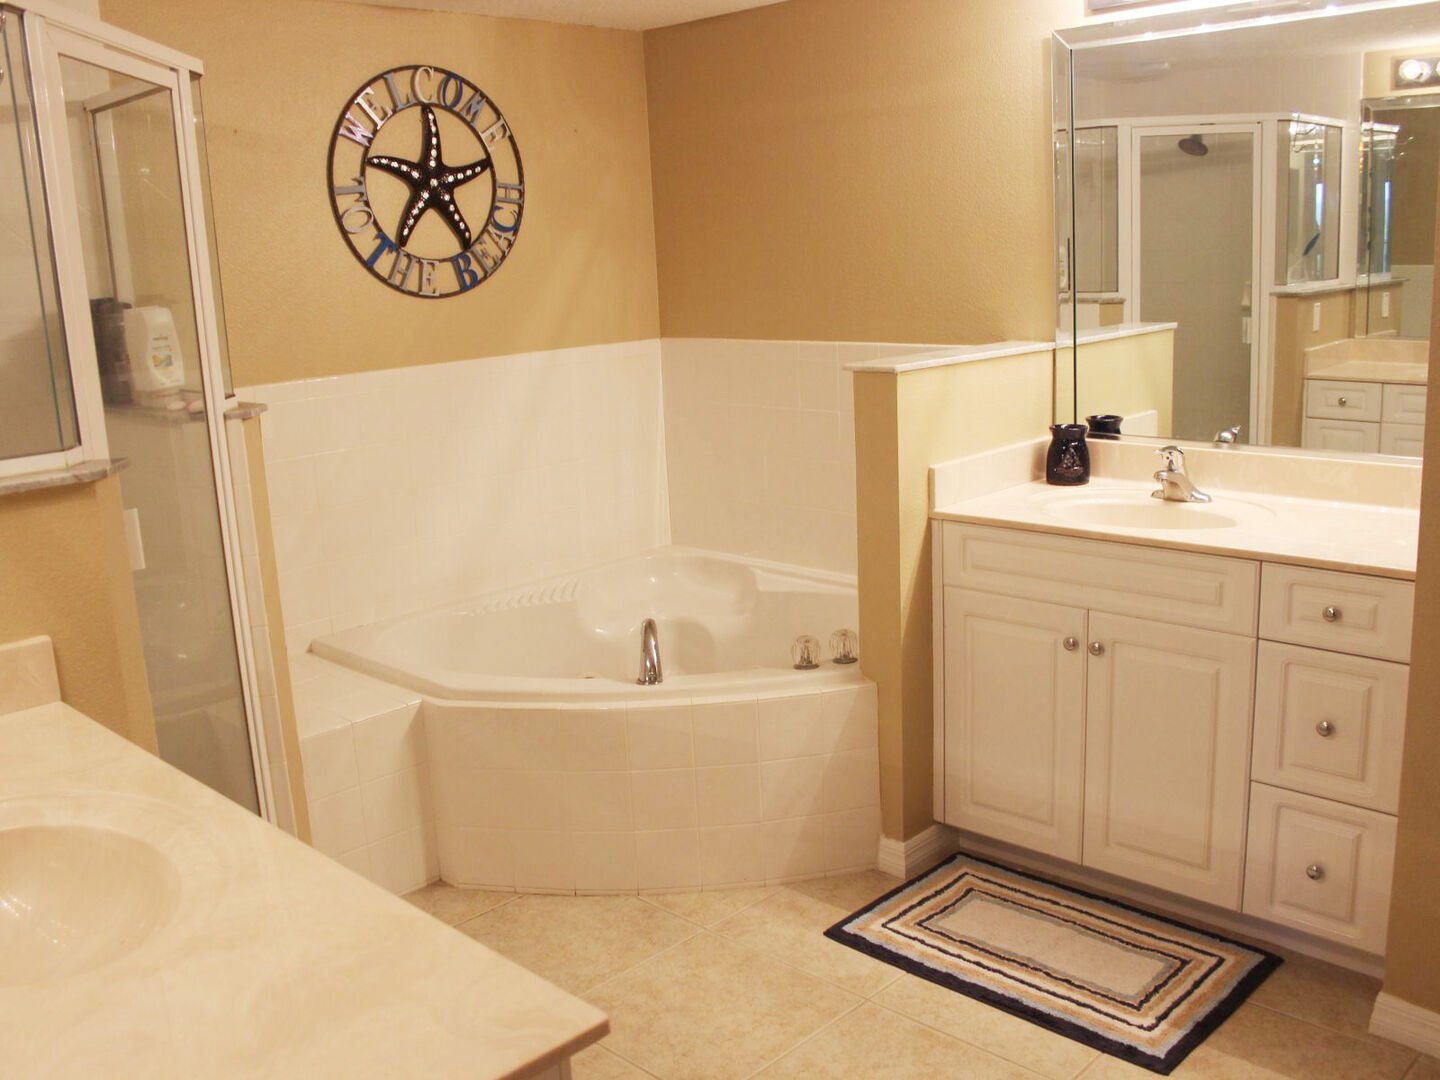 Private master bath with garden tub, walk-in shower and his/her sinks.